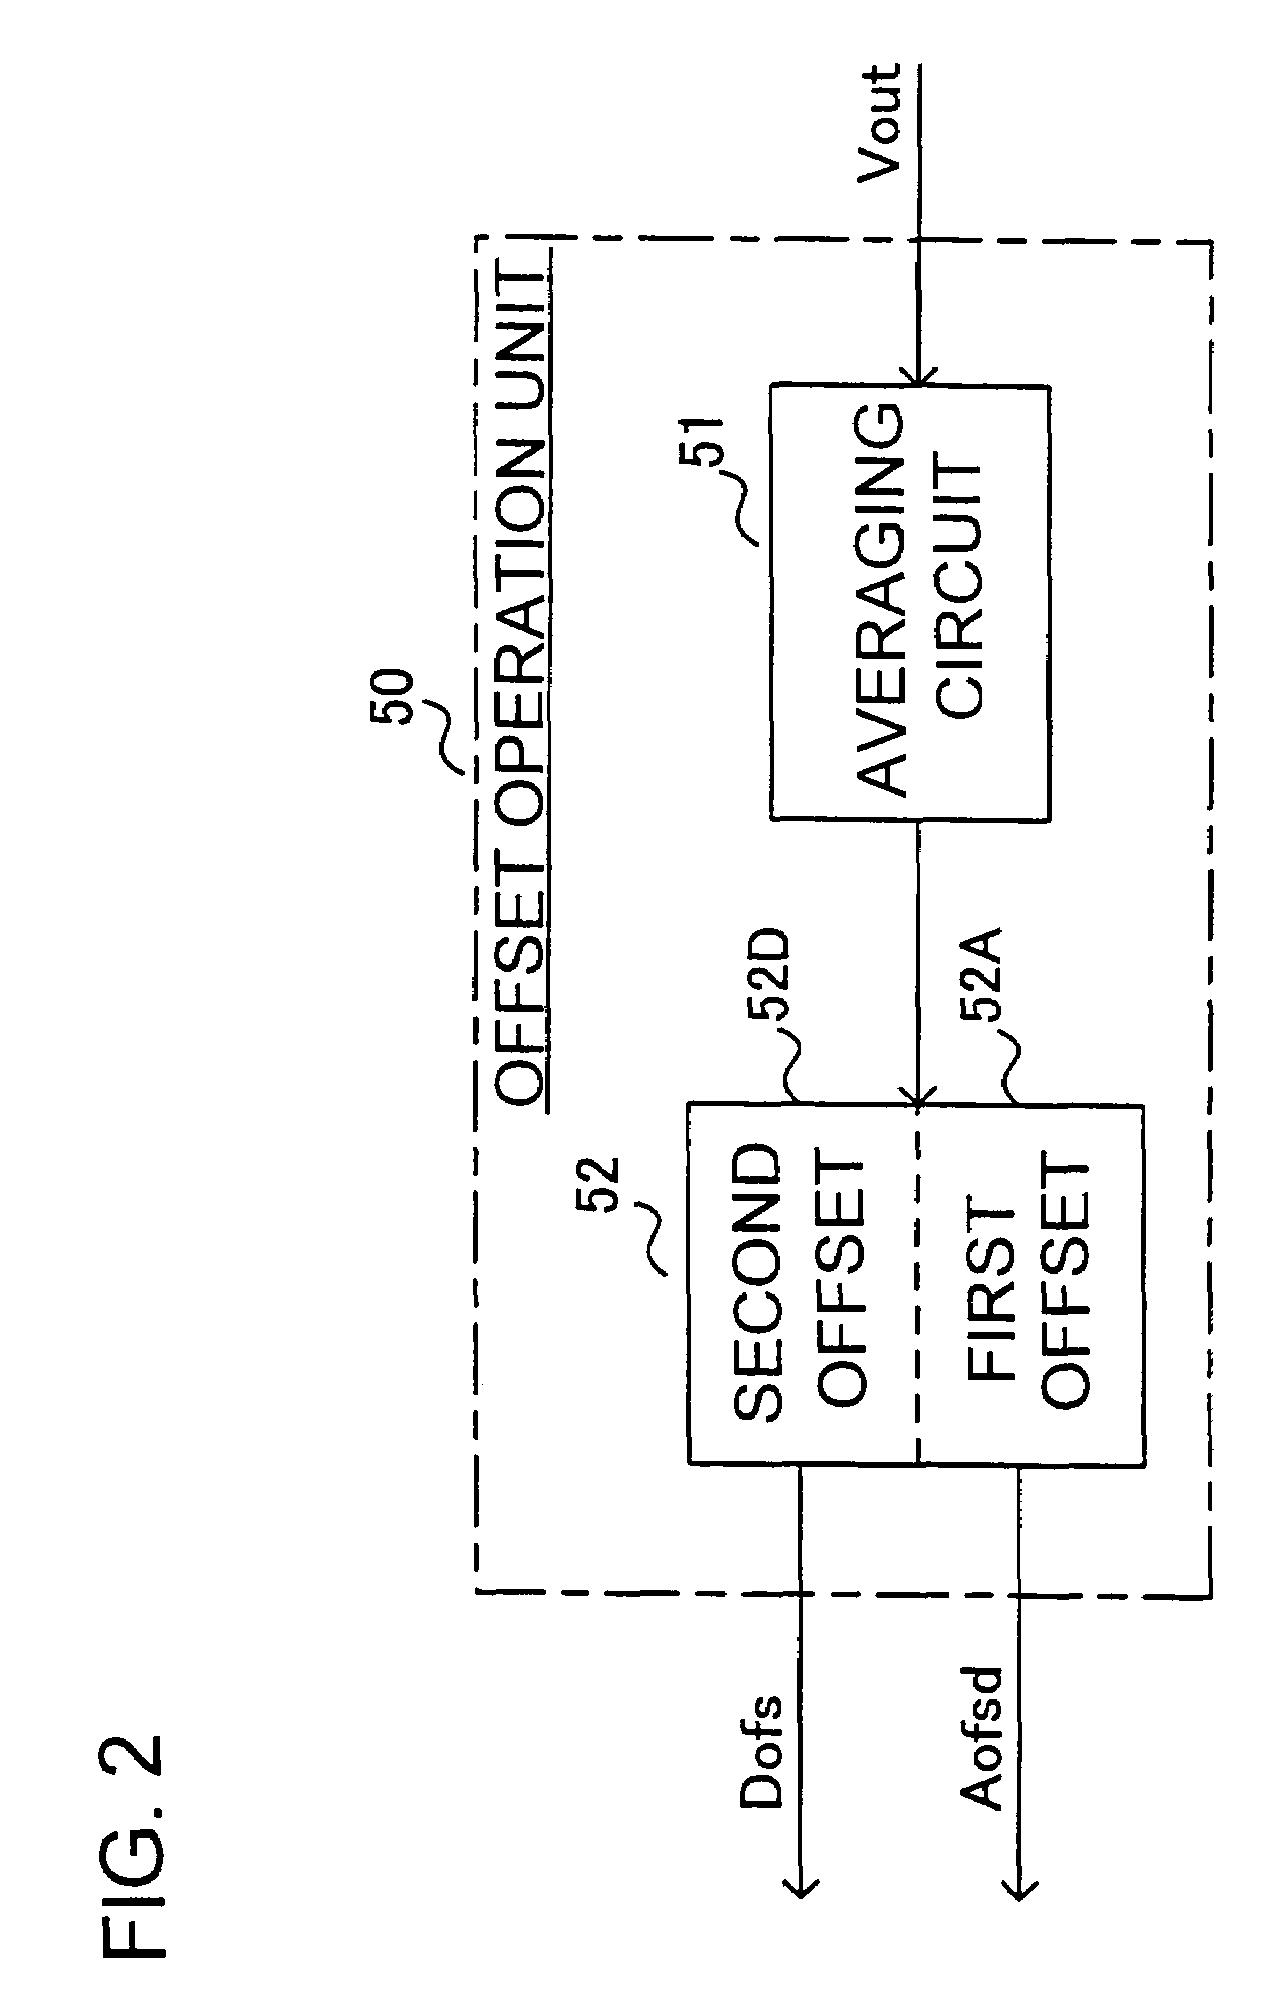 Analog to digital converter using both analog and digital offset voltages as feedback